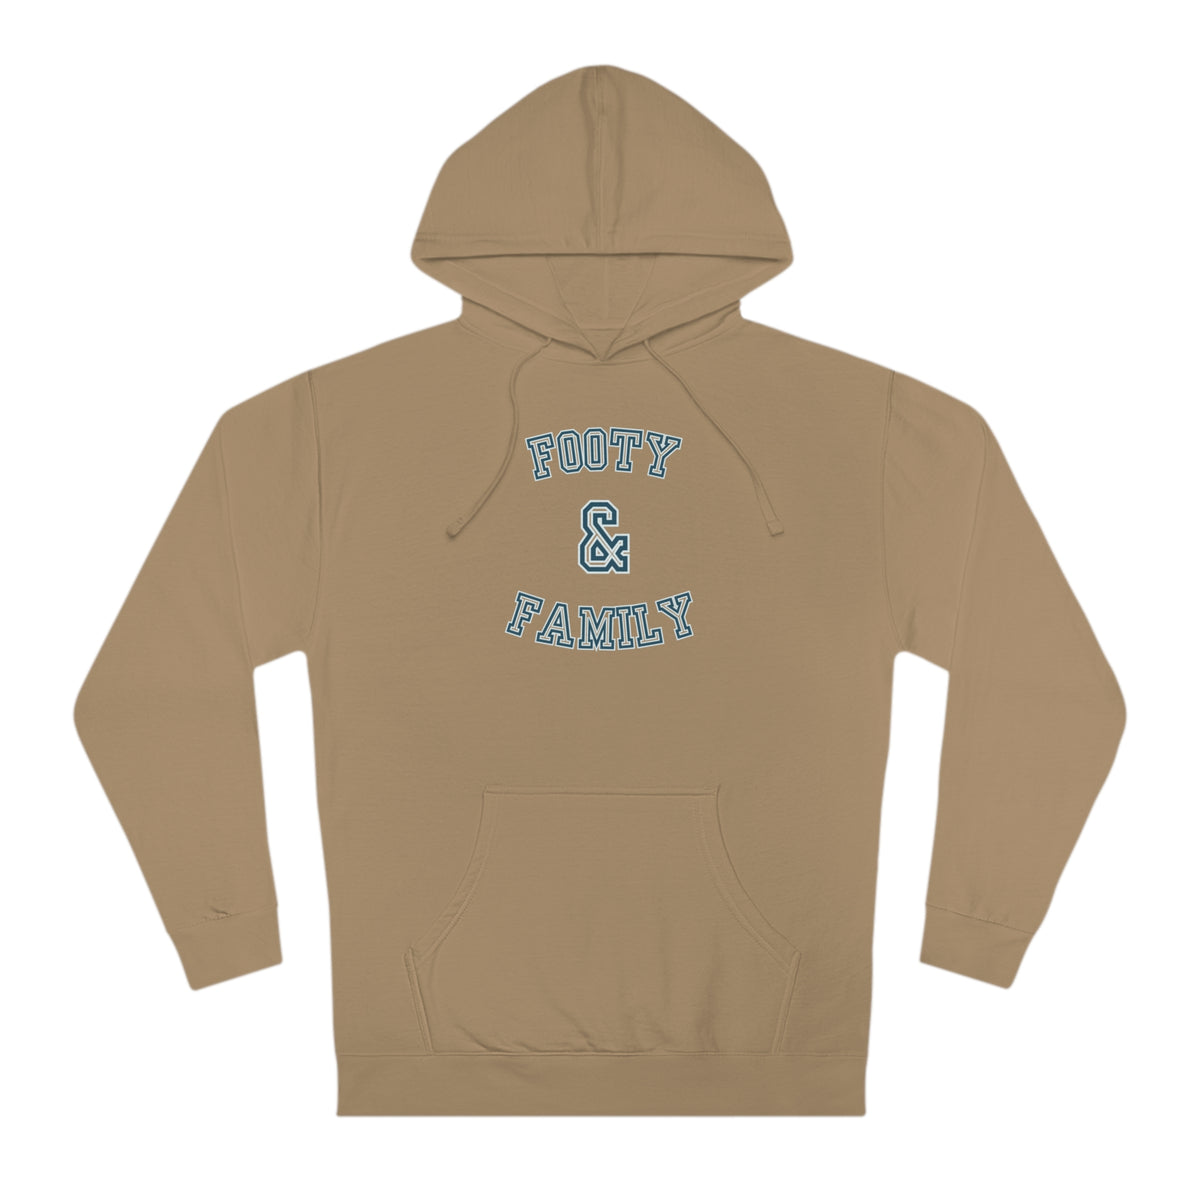 Footy and Family Adult Hooded Sweatshirt